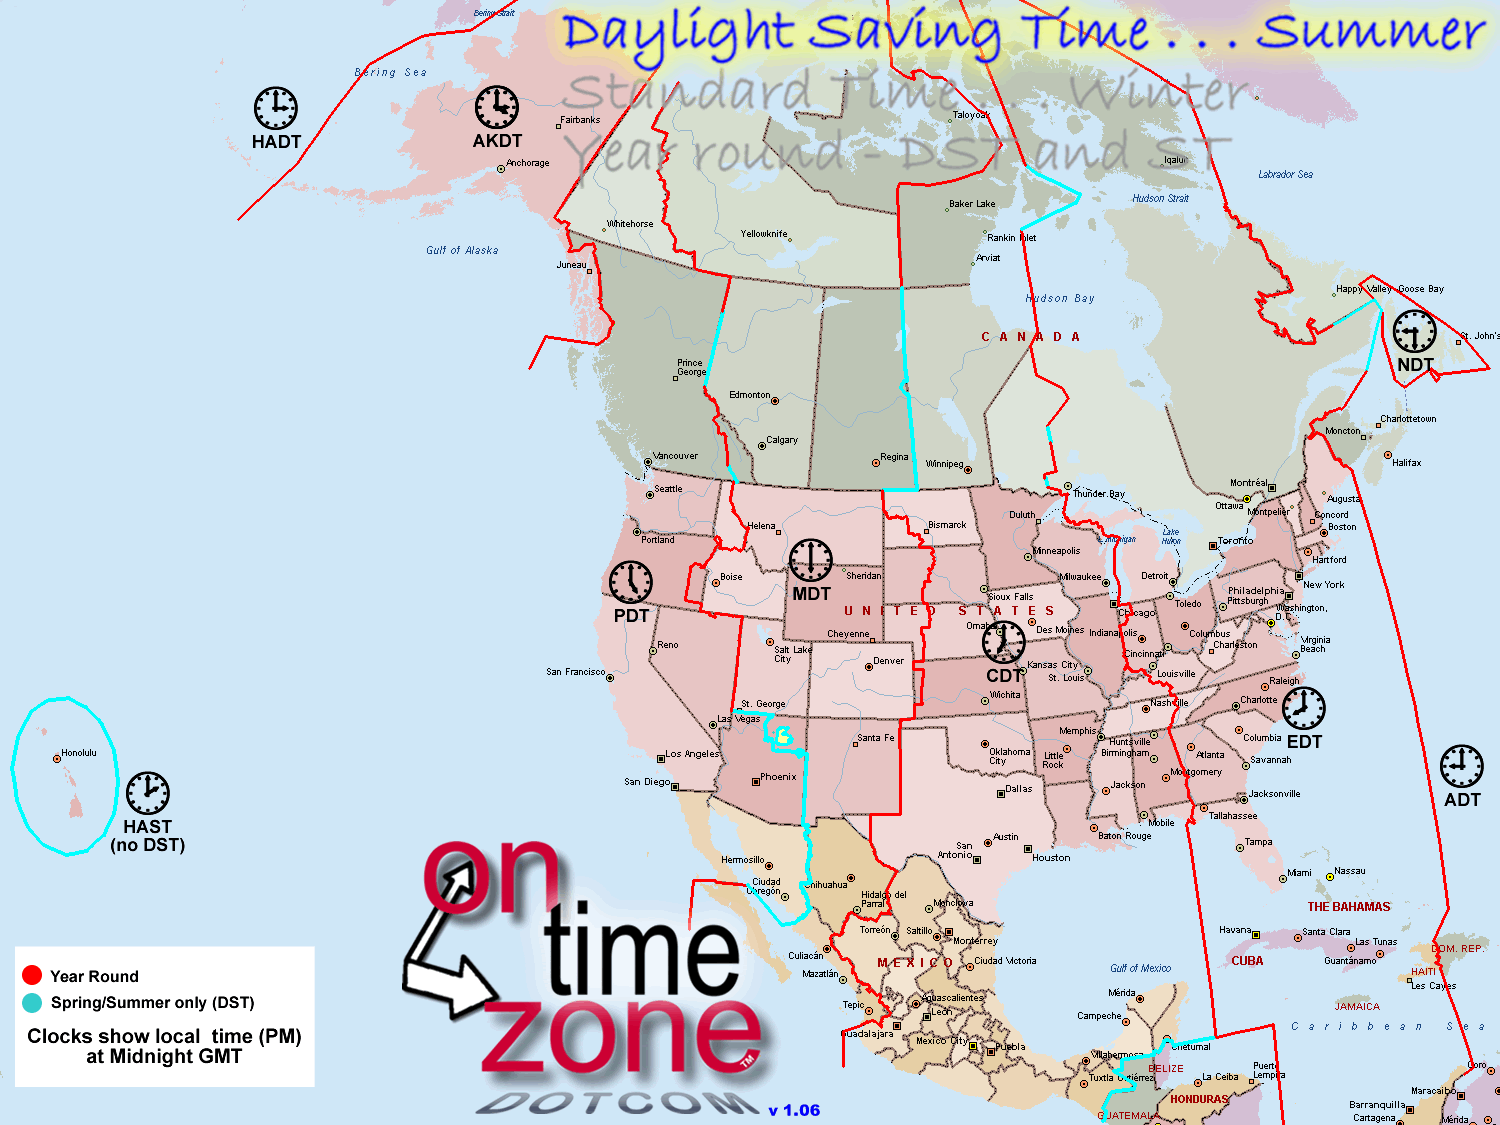 north american time zone map Ontimezone Com Time Zones For The Usa And North America north american time zone map